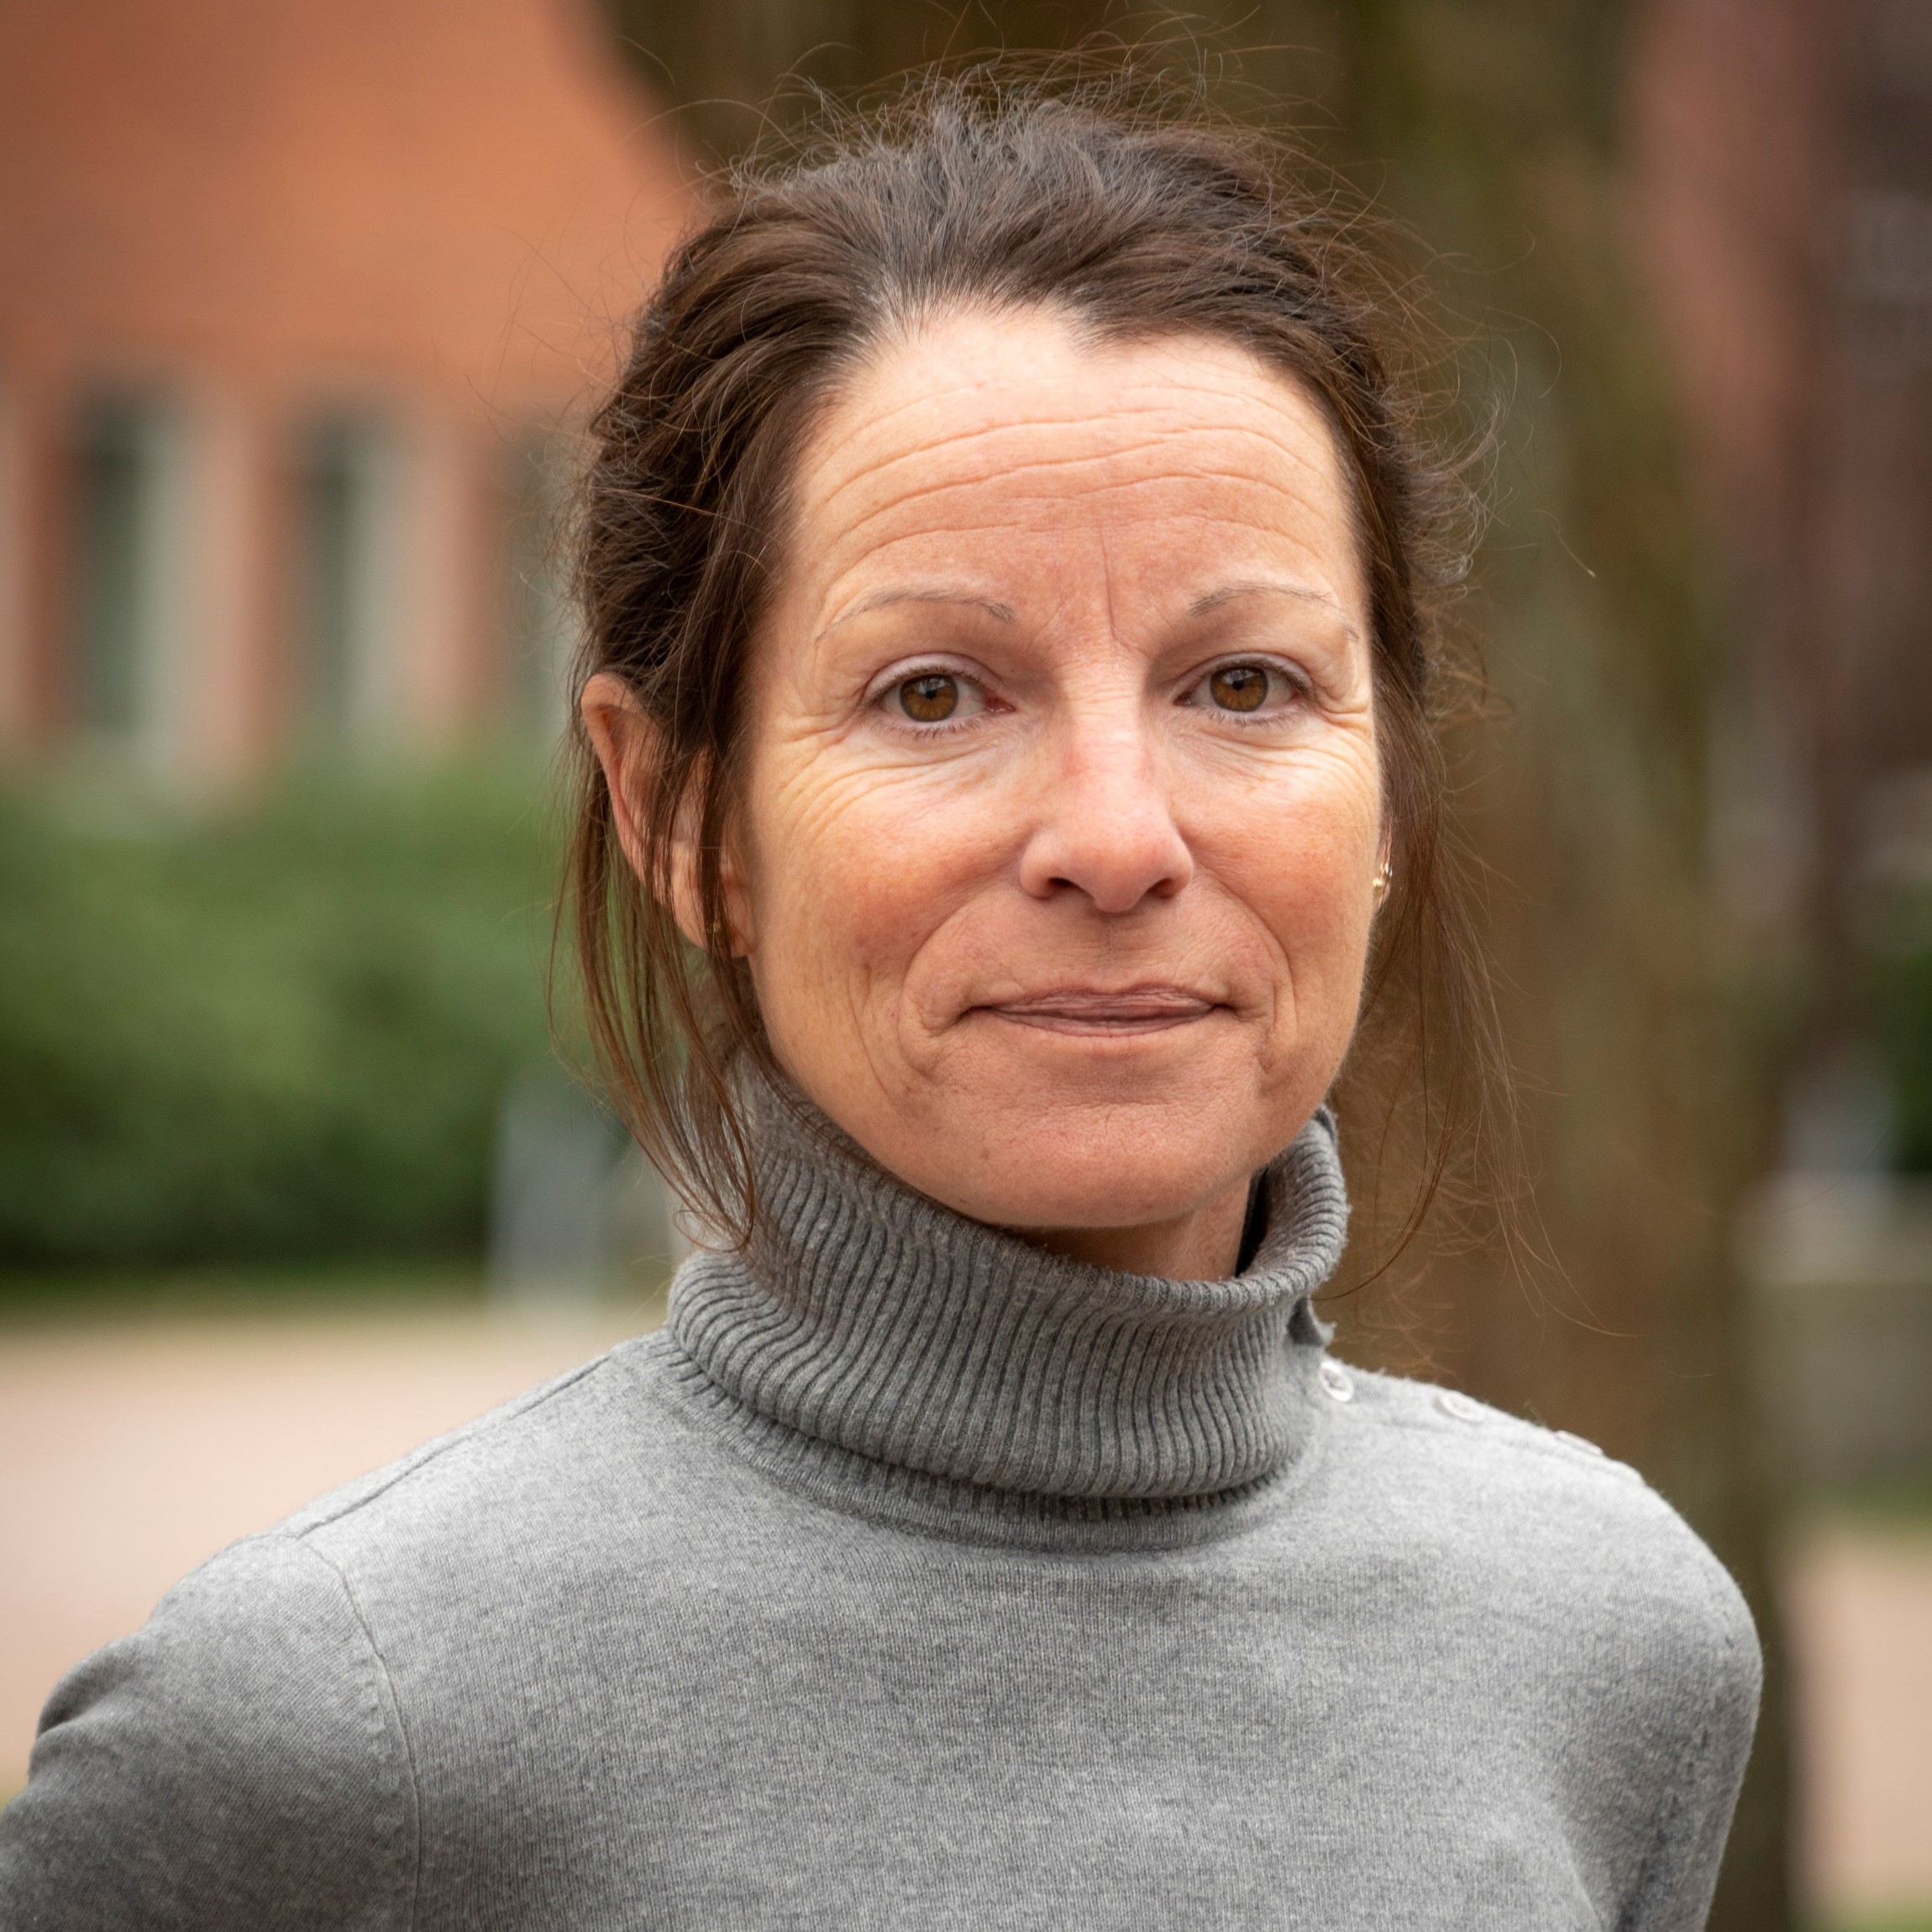 Pernilla Wittung-Stafshede